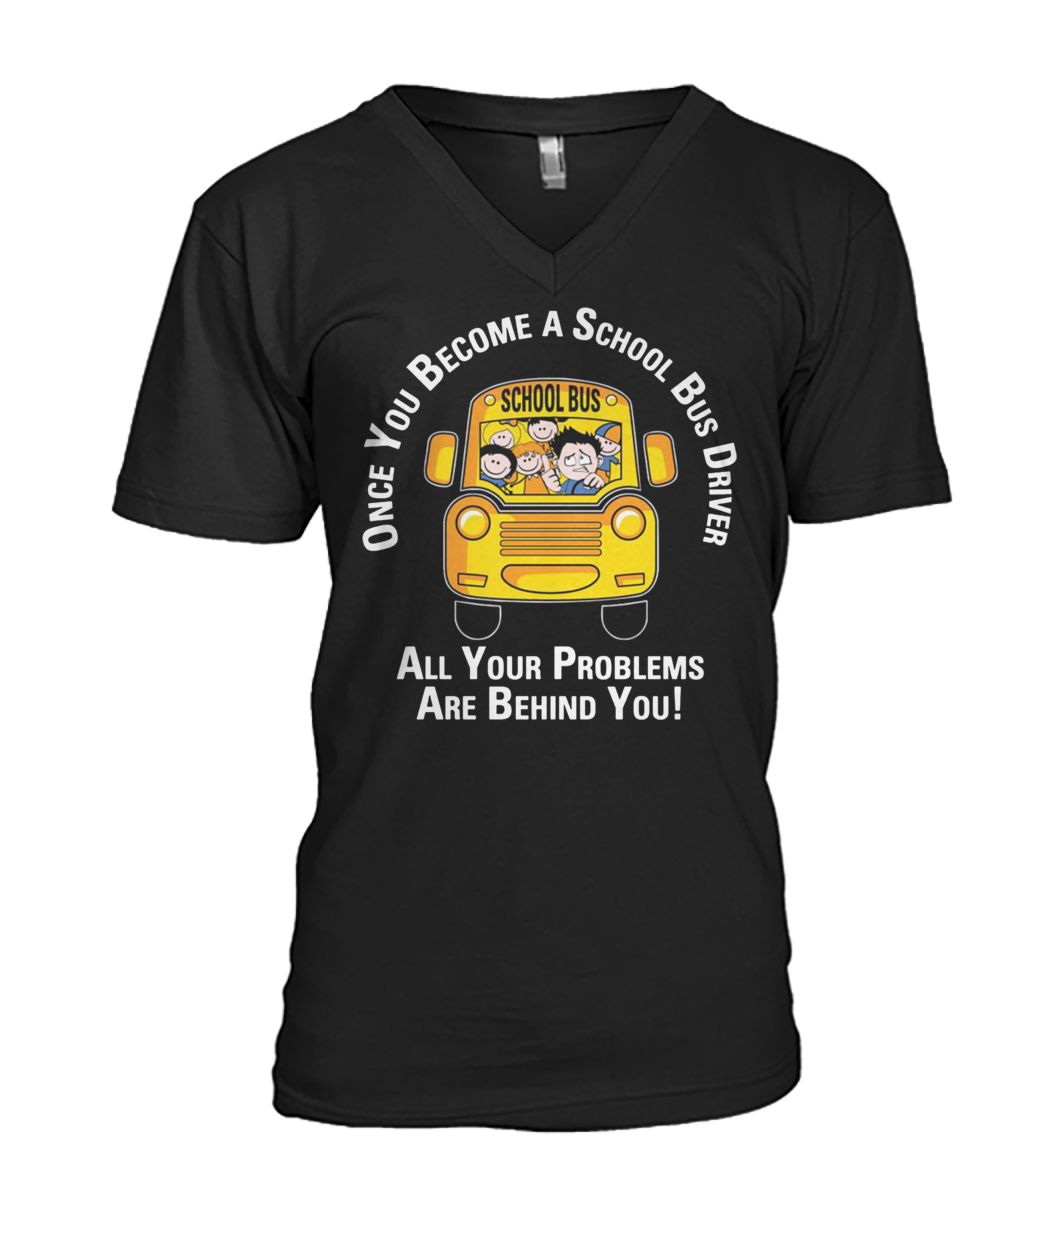 Once you become a school bus driver all your problem are behind you men's v-neck